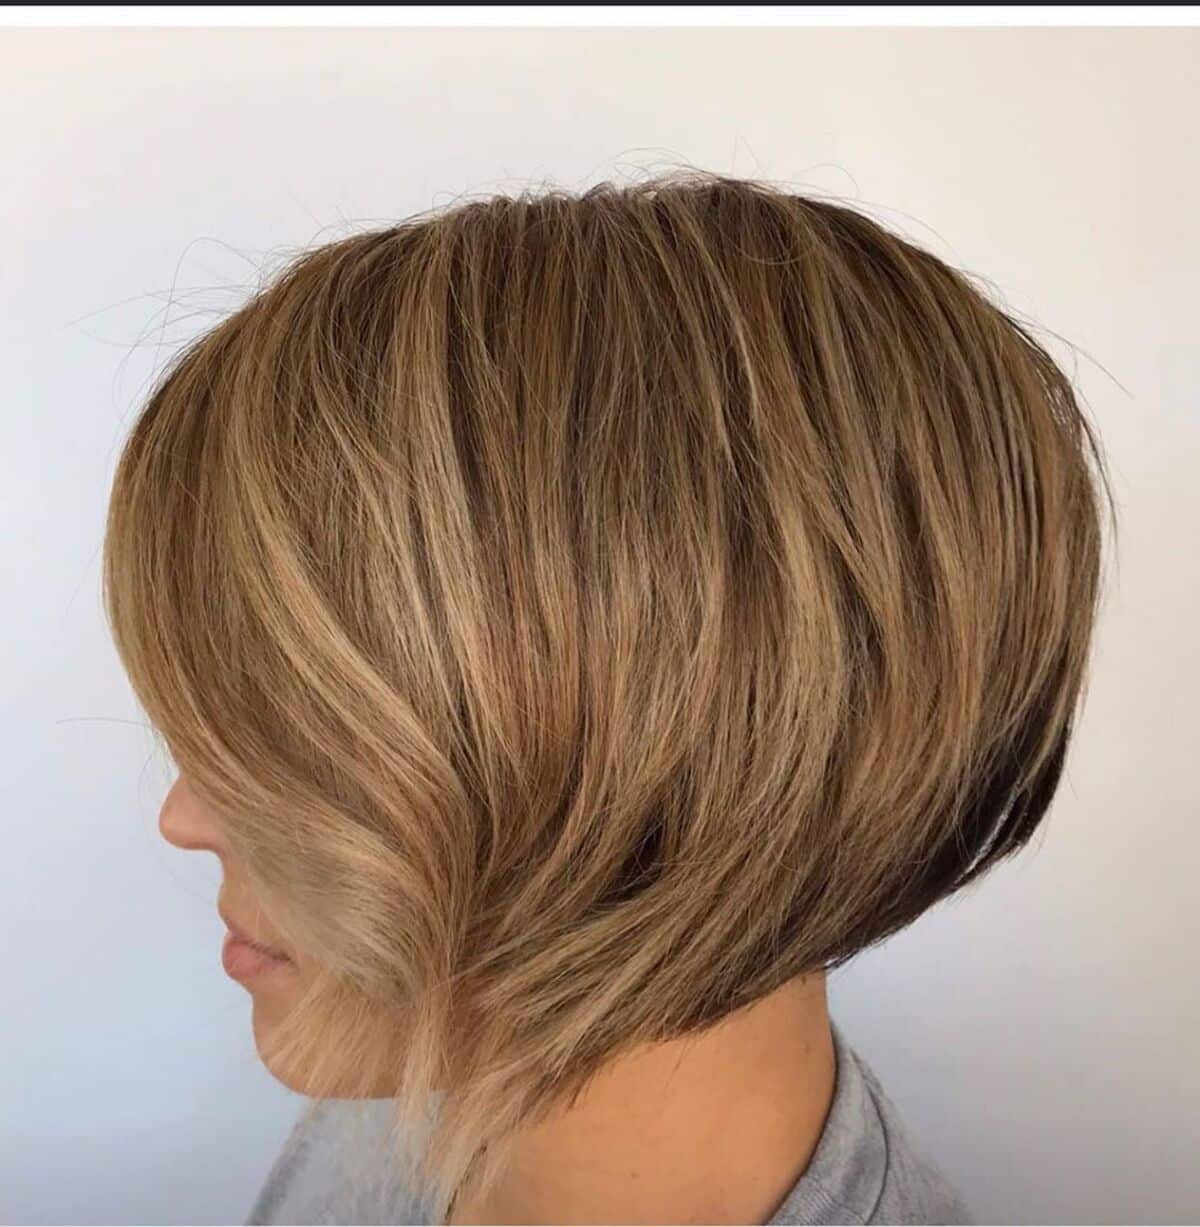 Chin-length Stacked Bob with Bangs and an Undercut